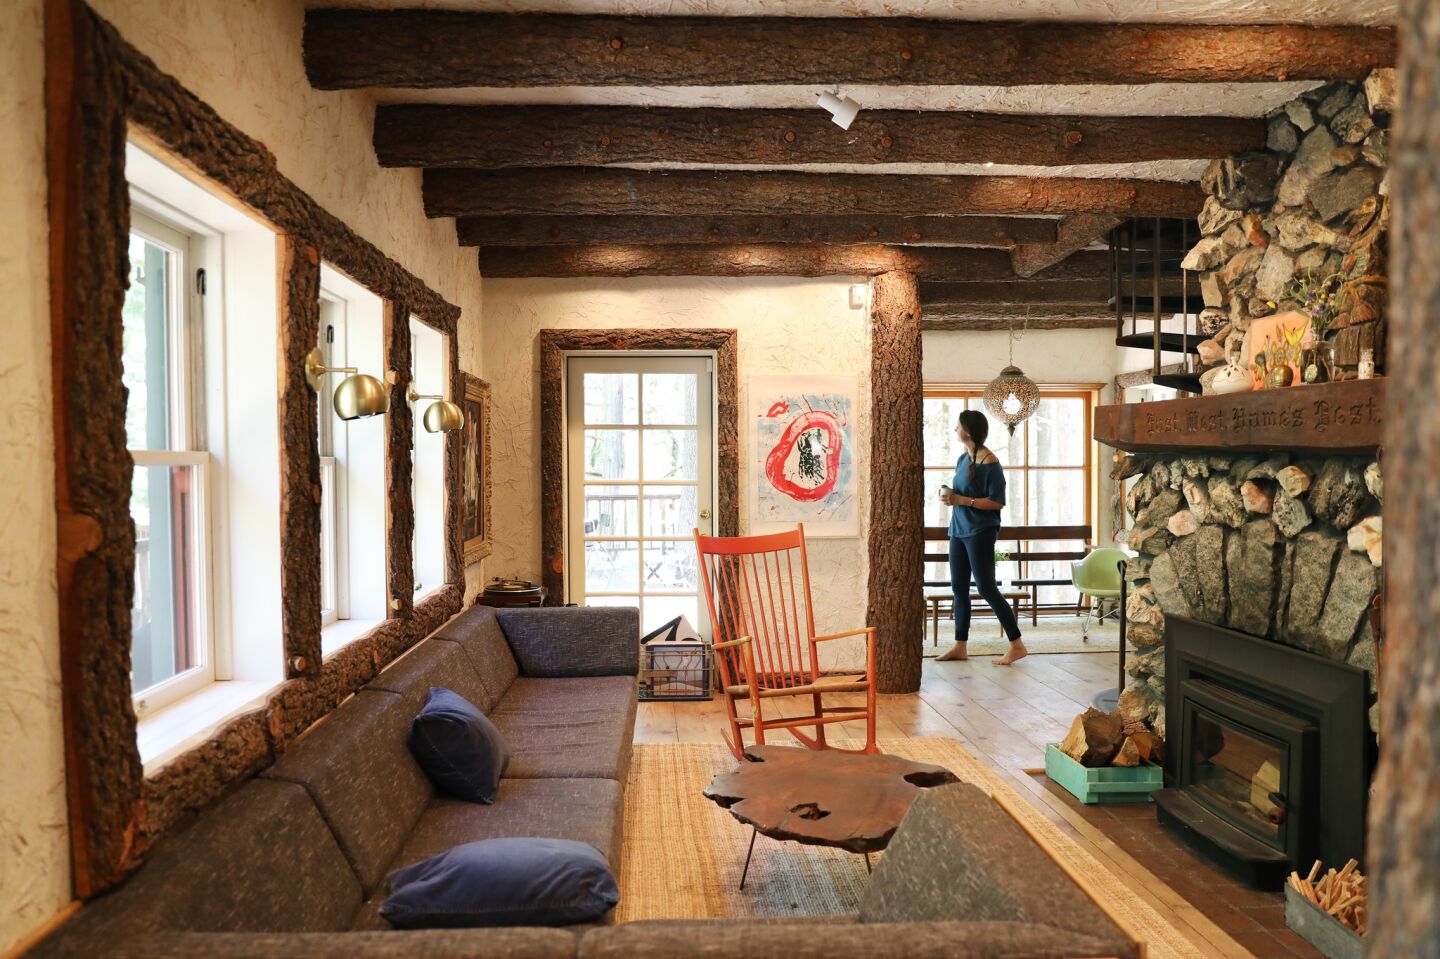 A Hans Wegner rocker finds a cozy home in front of a granite-covered fireplace.